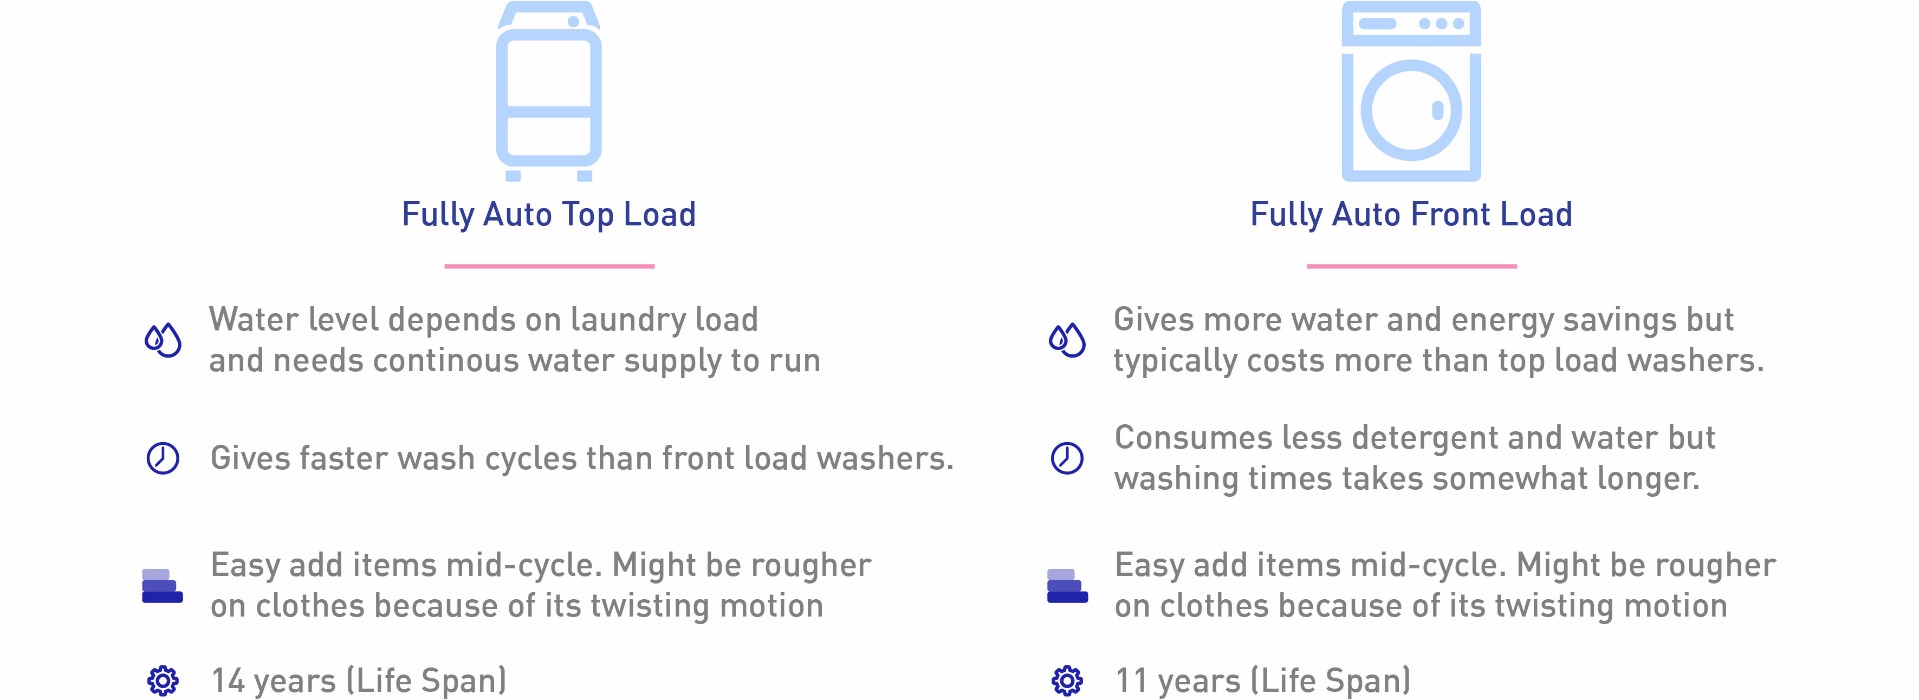 washer buyers guide type